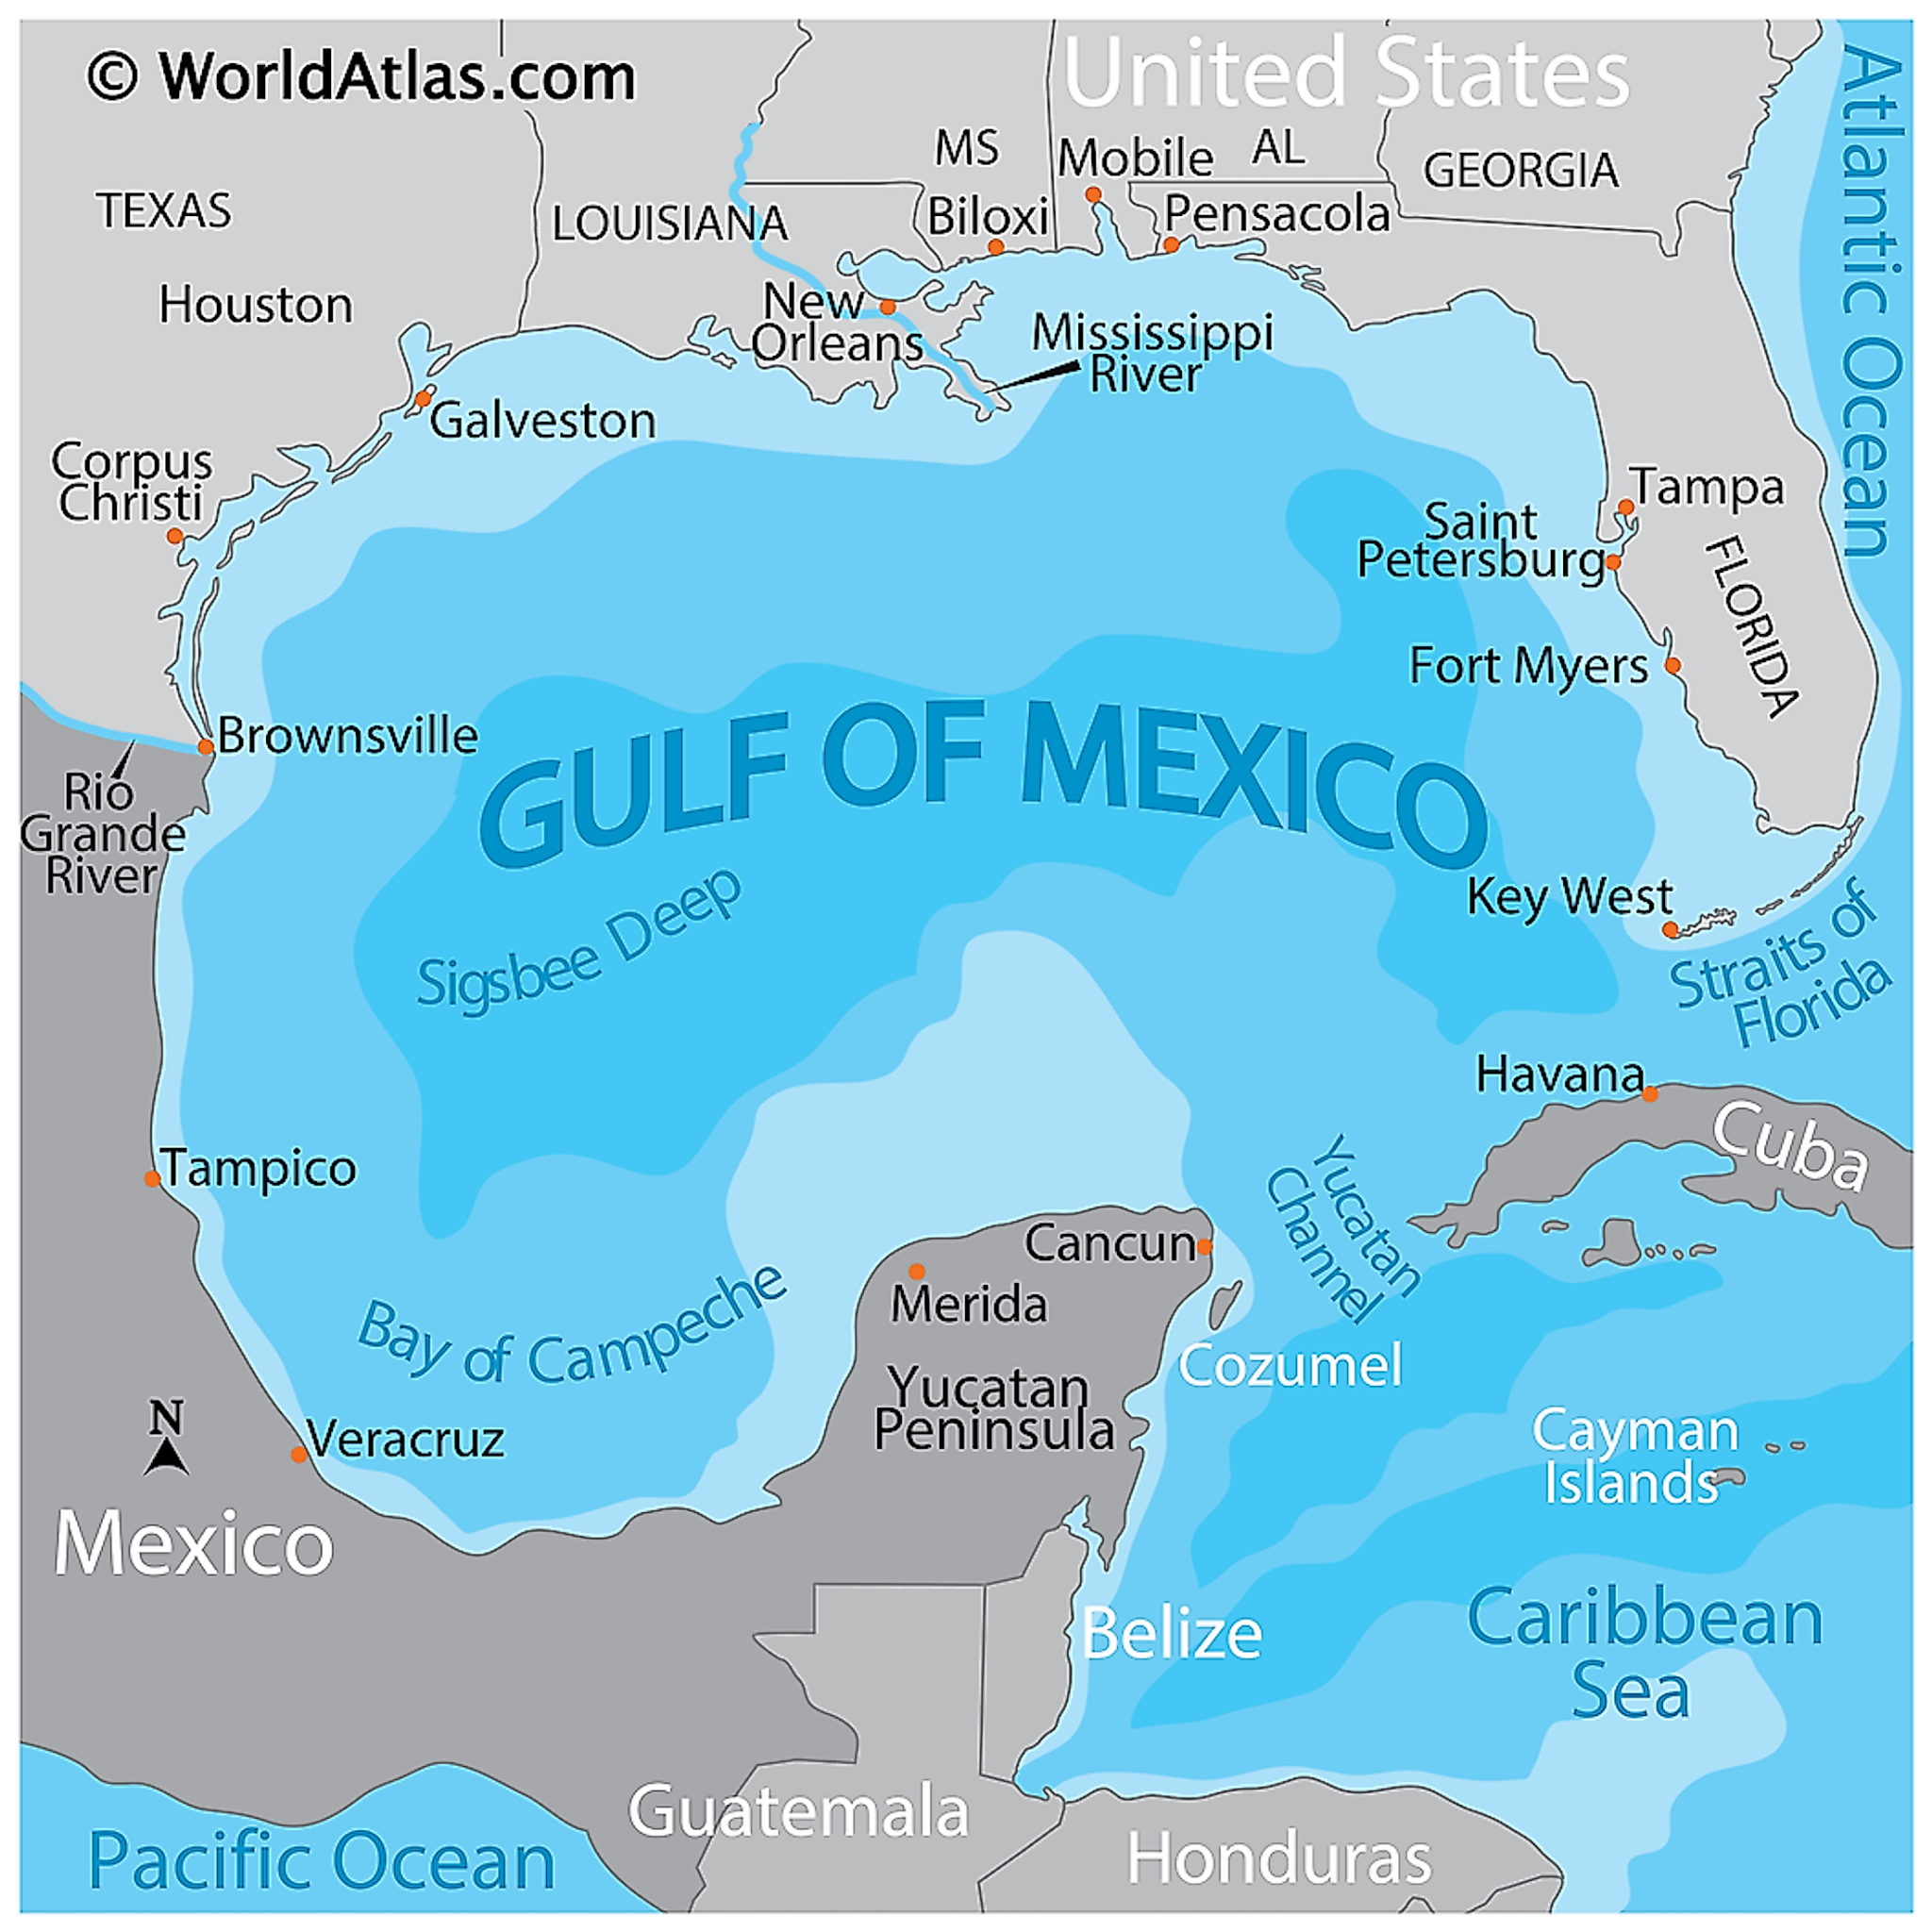 Sigsbee Deep Is Deepest Part of The Gulf Of Mexico: What's Down There?